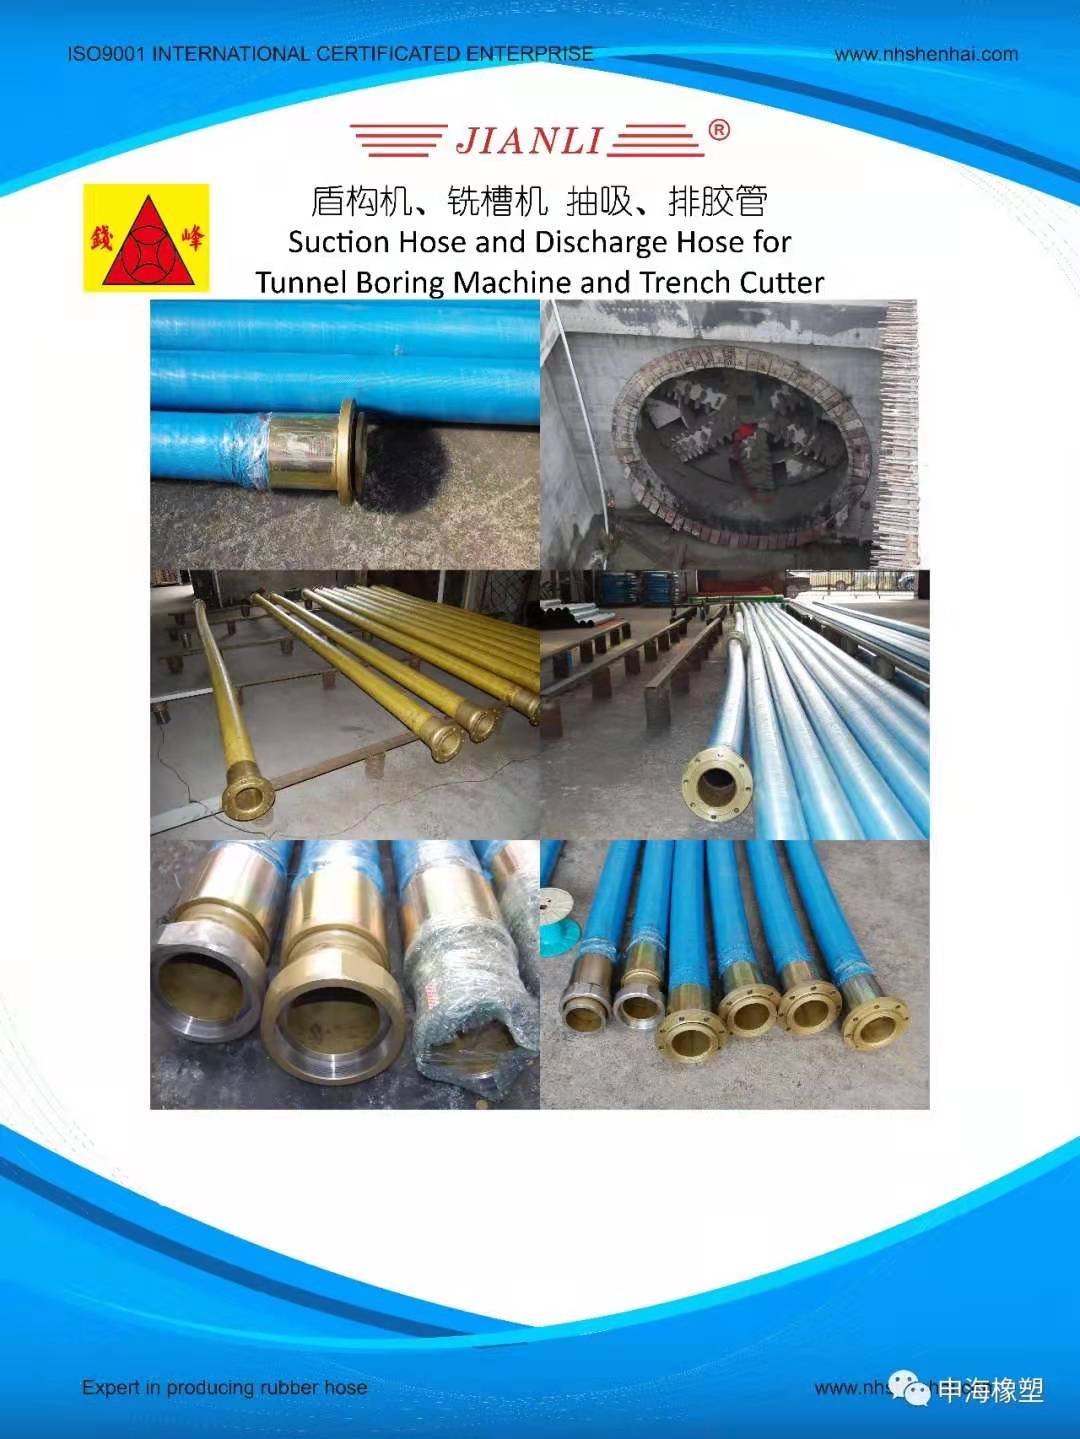 Buffer Hose, Suction Hose and Discharge Hose for Tunnel Boring Machine